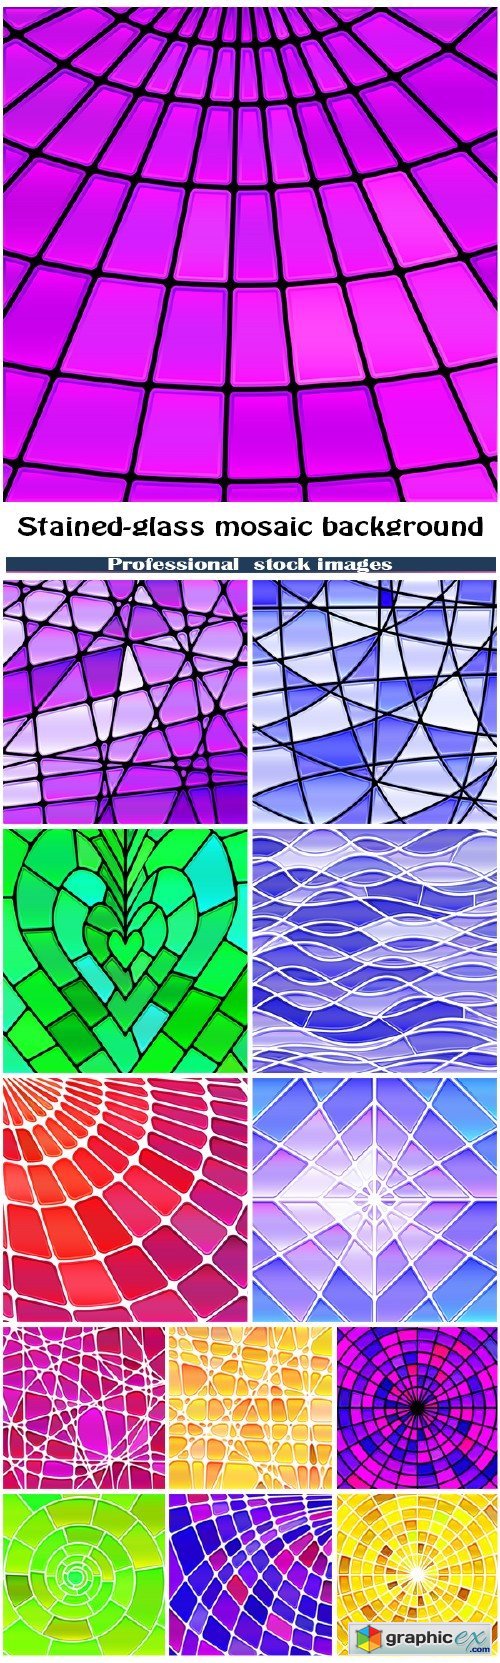 Abstract vector stained-glass mosaic background